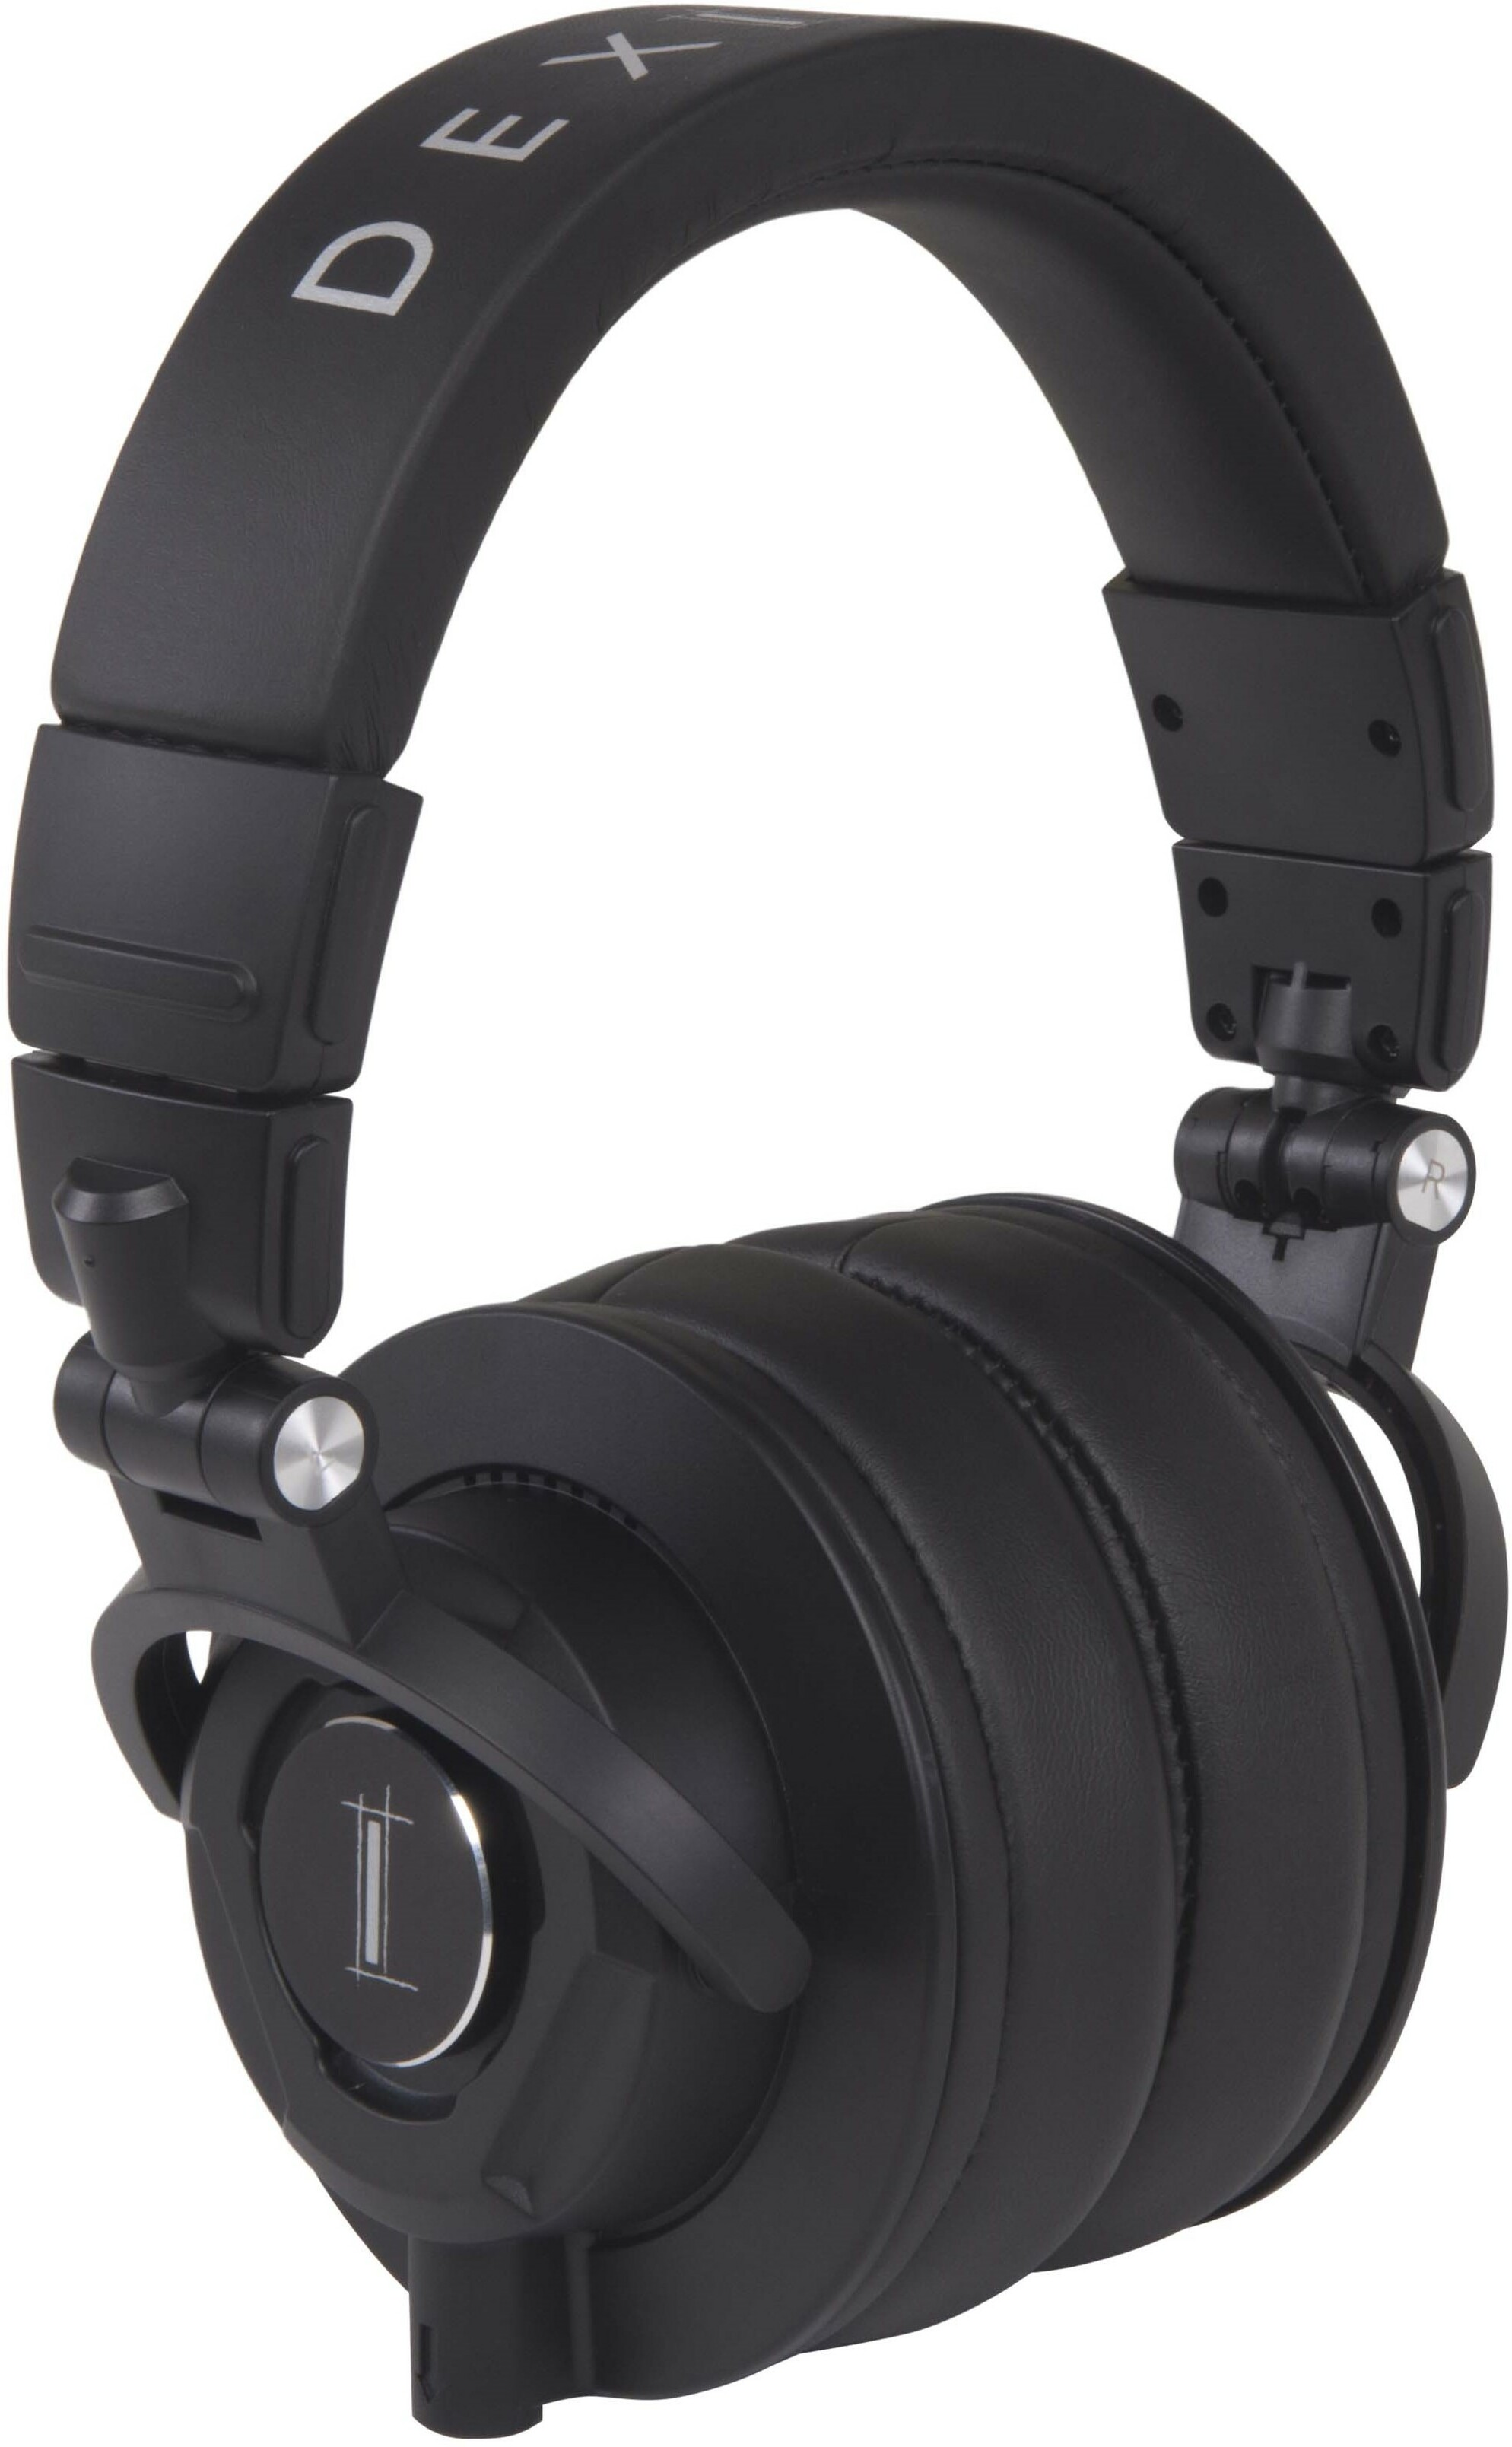 Dexibell Dxhf7 - Closed headset - Main picture